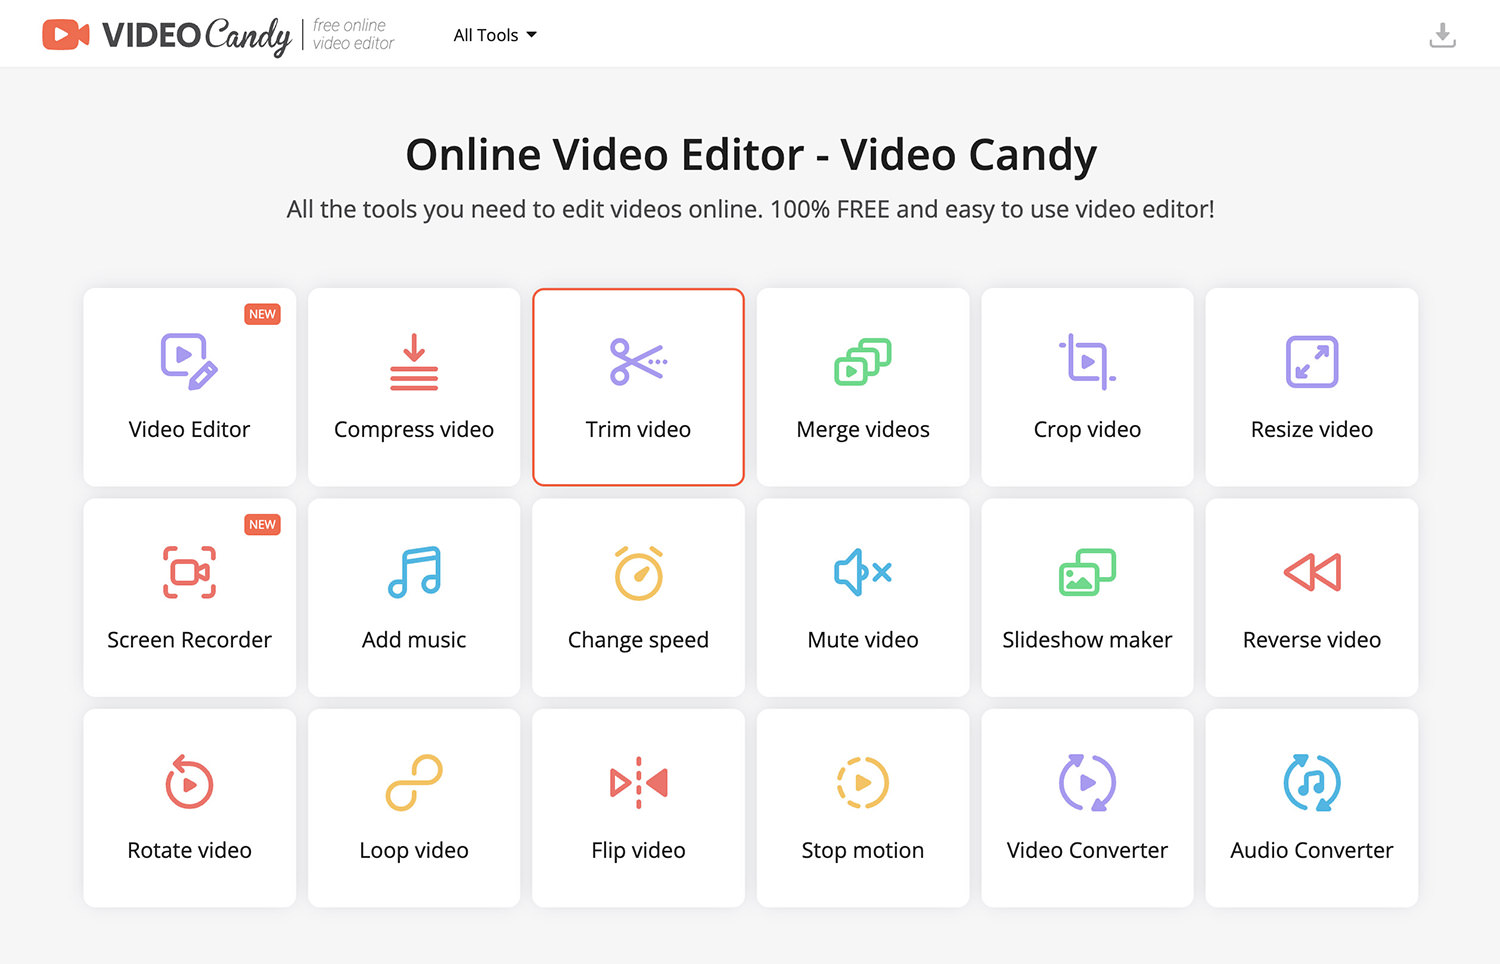 Video Candy Homepage